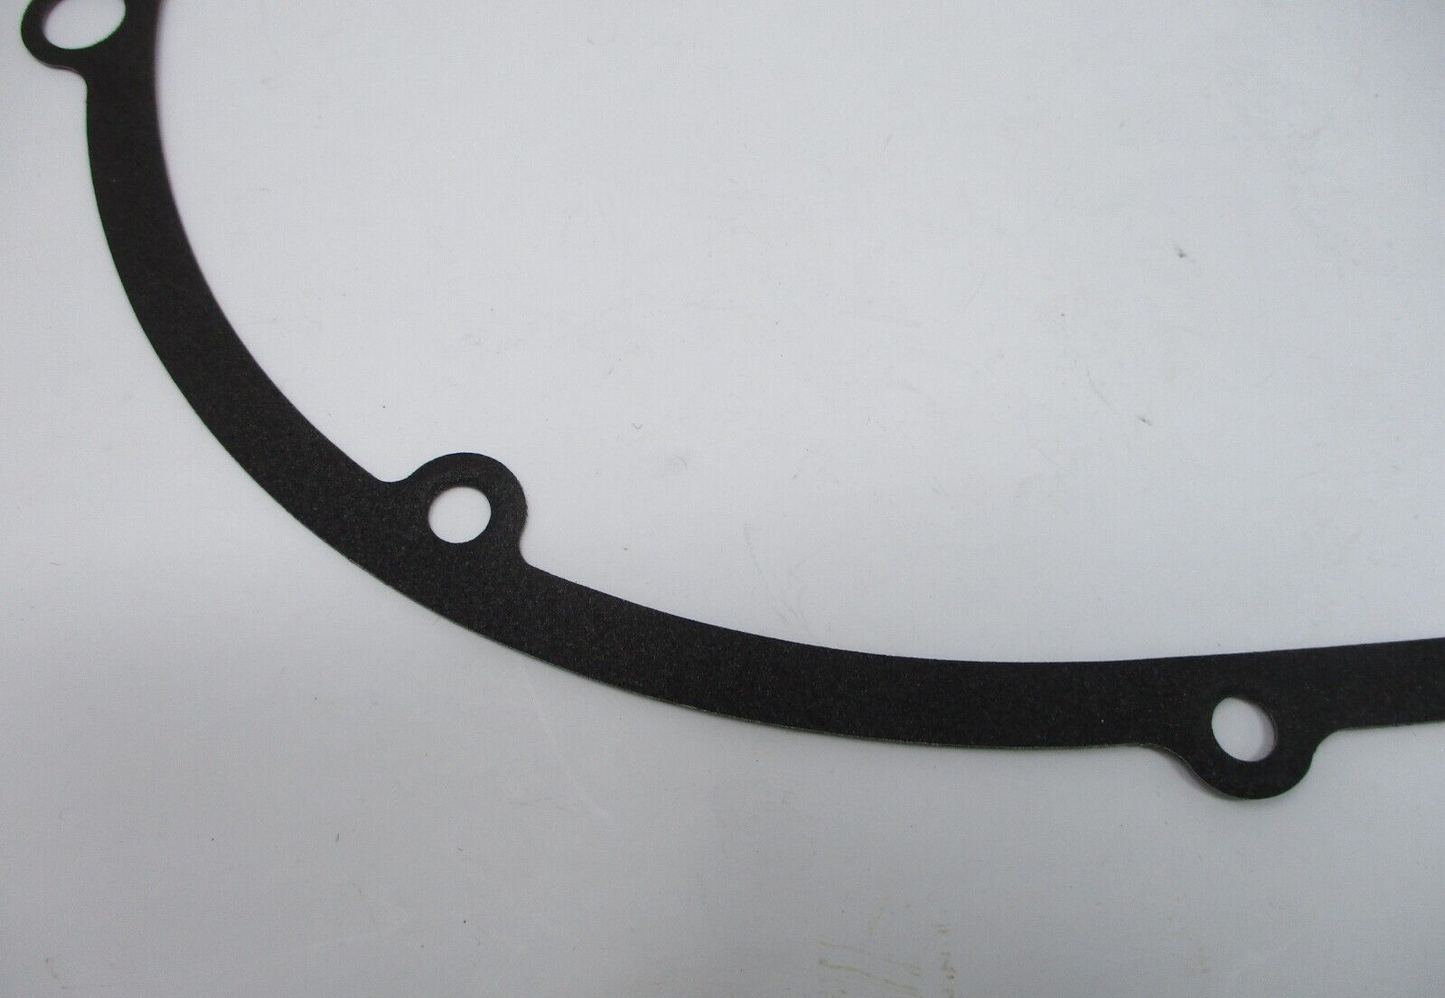 Buell 03-10 XB Primary Cover Gasket   25378-02B